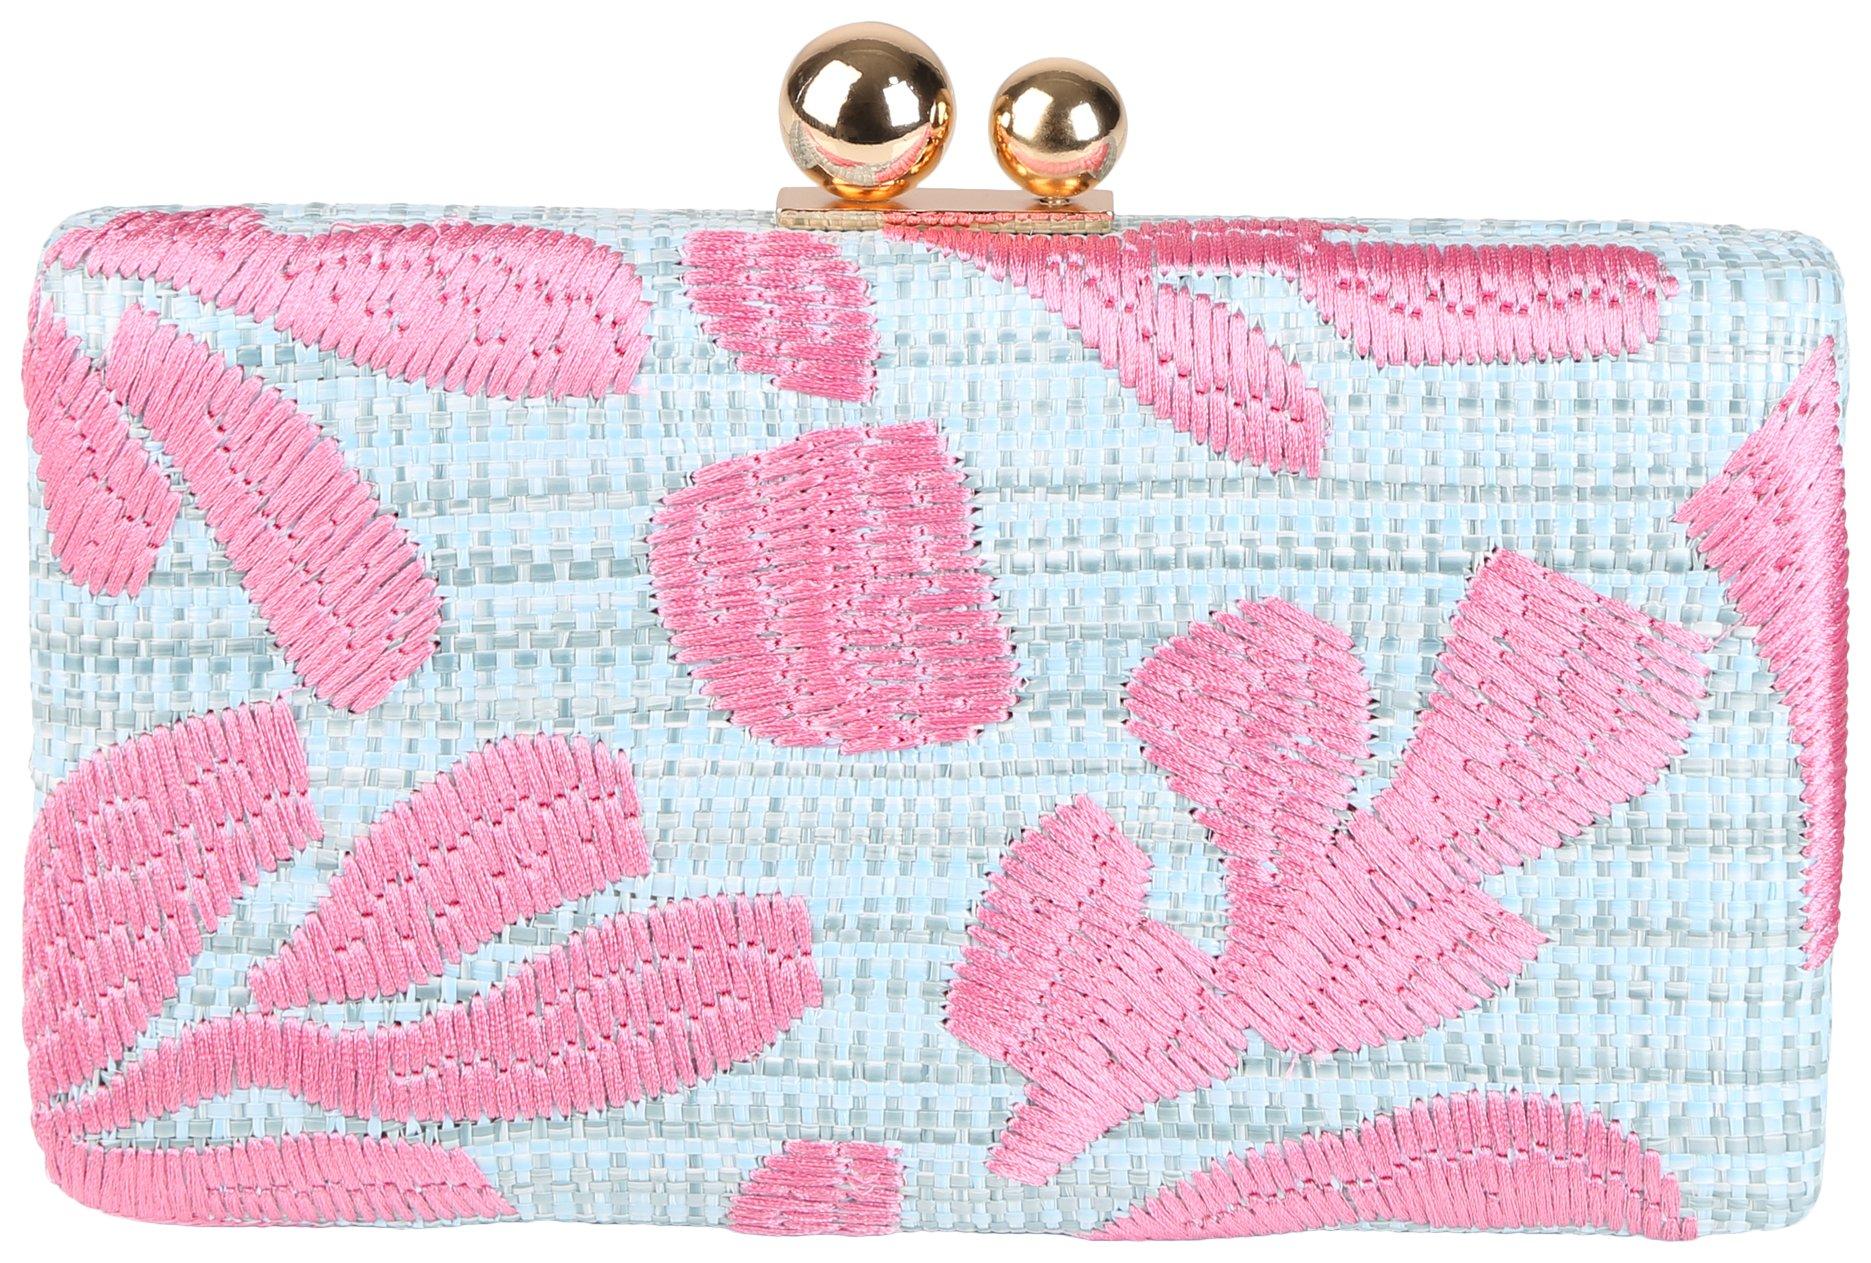 Embroidery Print Woven Crossbody Clutch